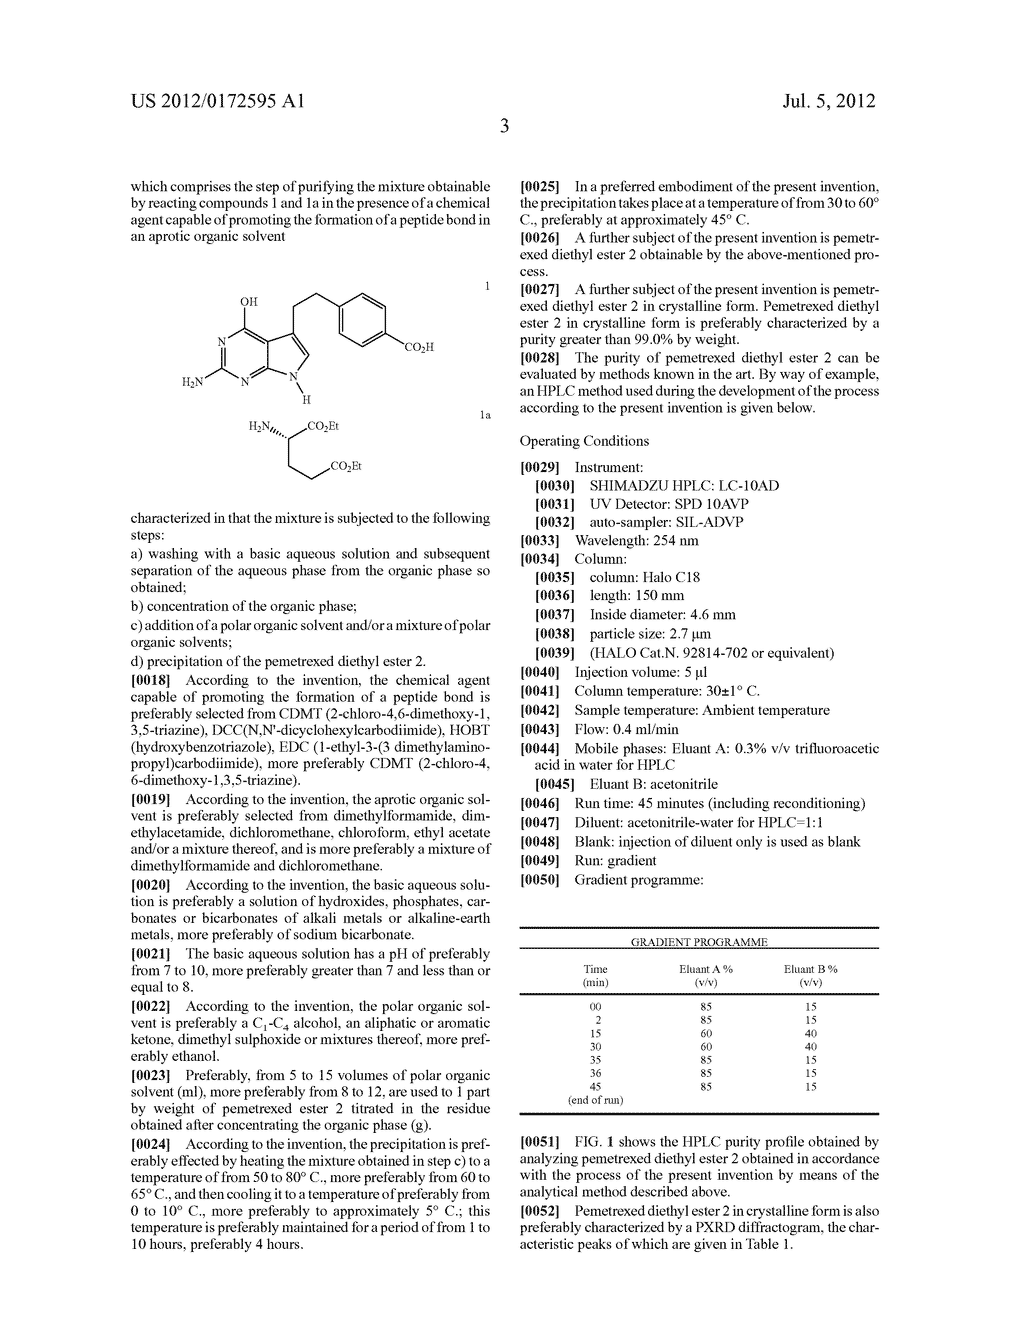 NOVEL PROCESS FOR THE SYNTHESIS OF PEMETREXED DISODIUM SALT - diagram, schematic, and image 10